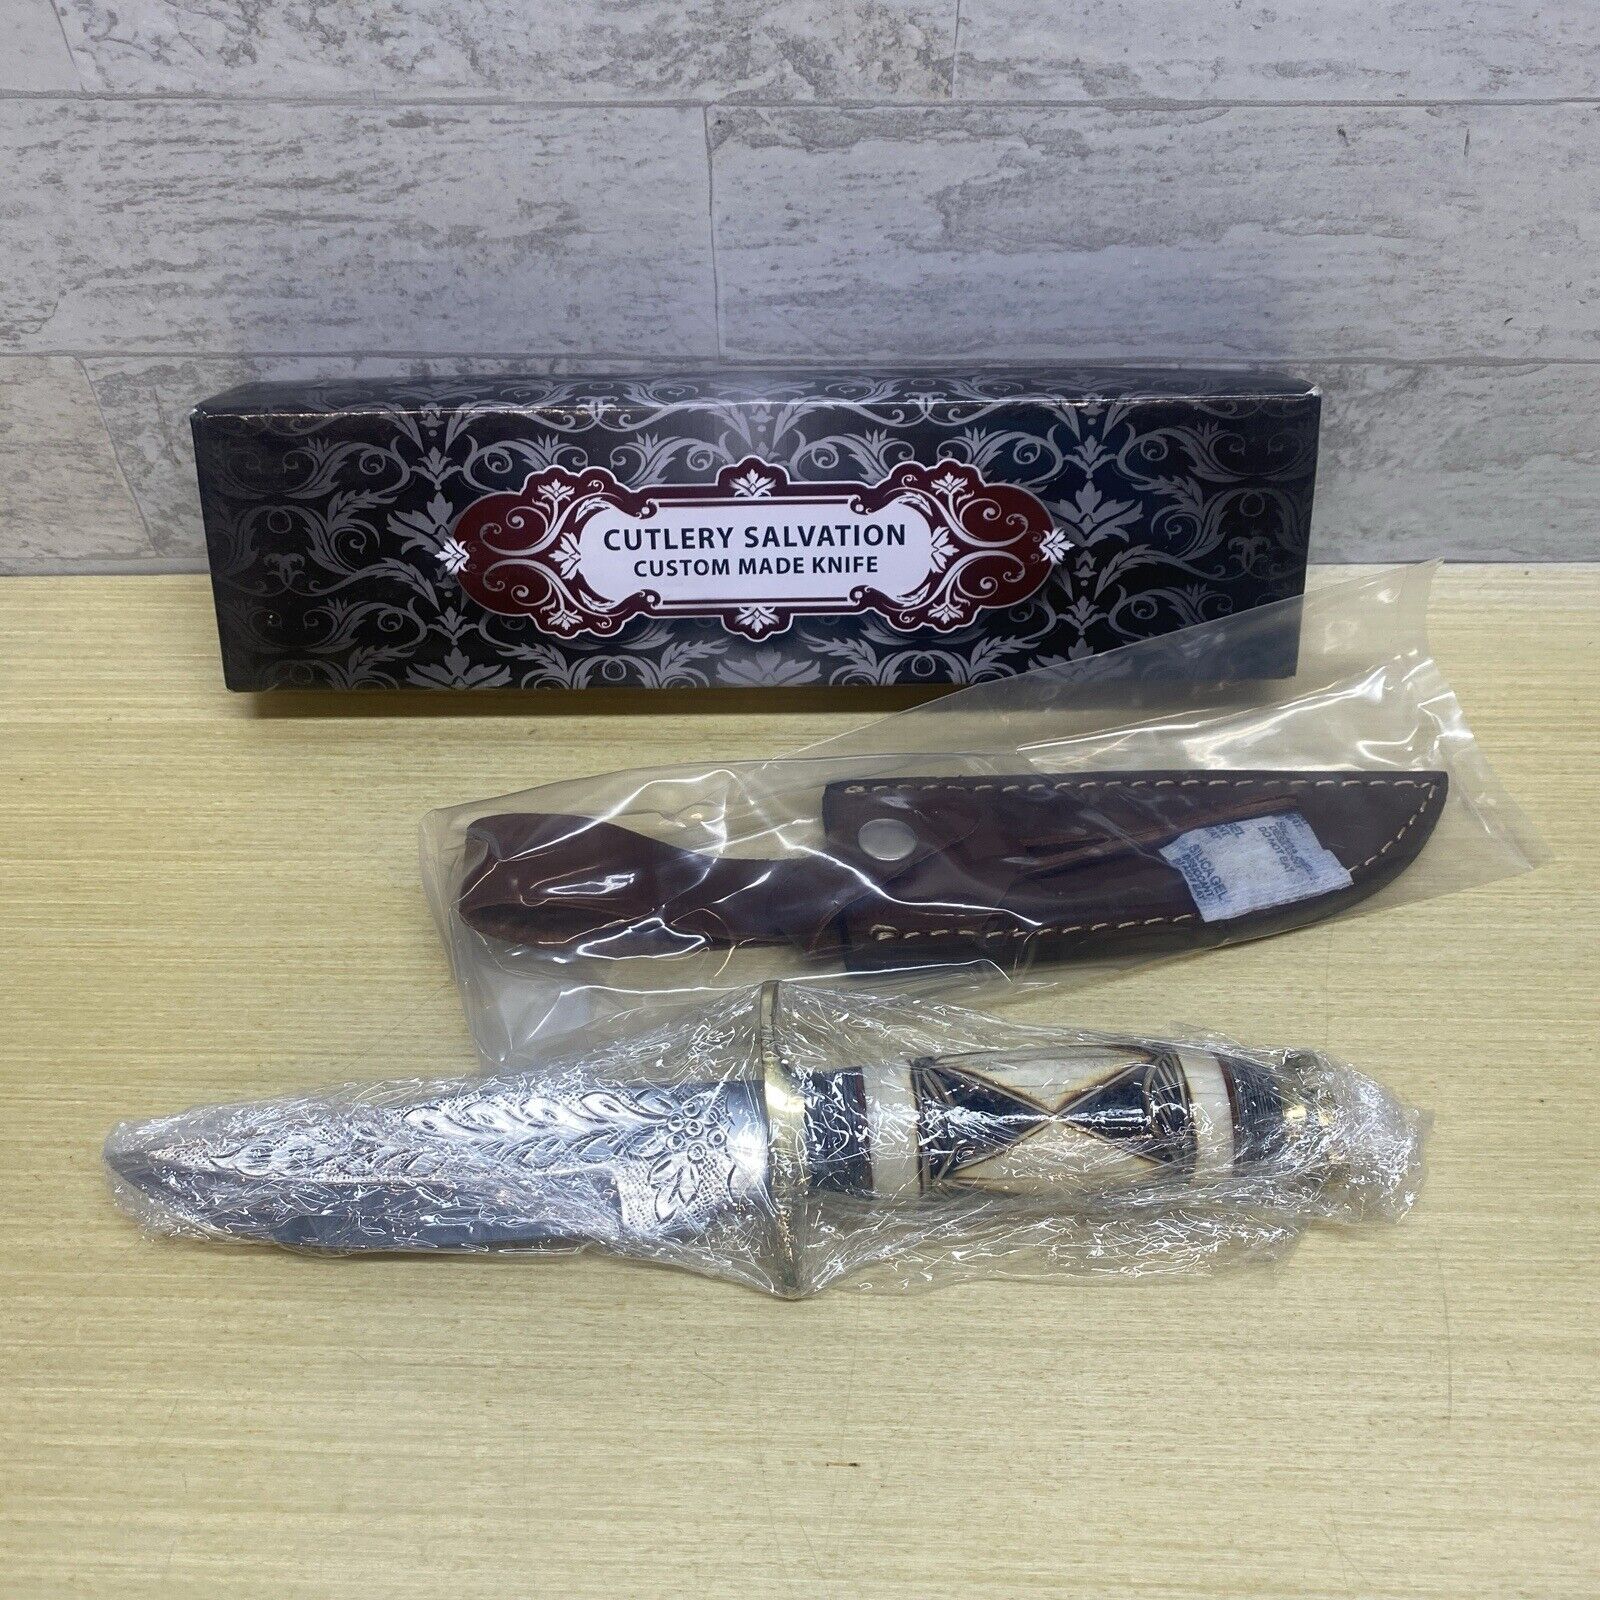 Cutlery Salvation Knife Handmade Engraved Handle NEW IN BOX